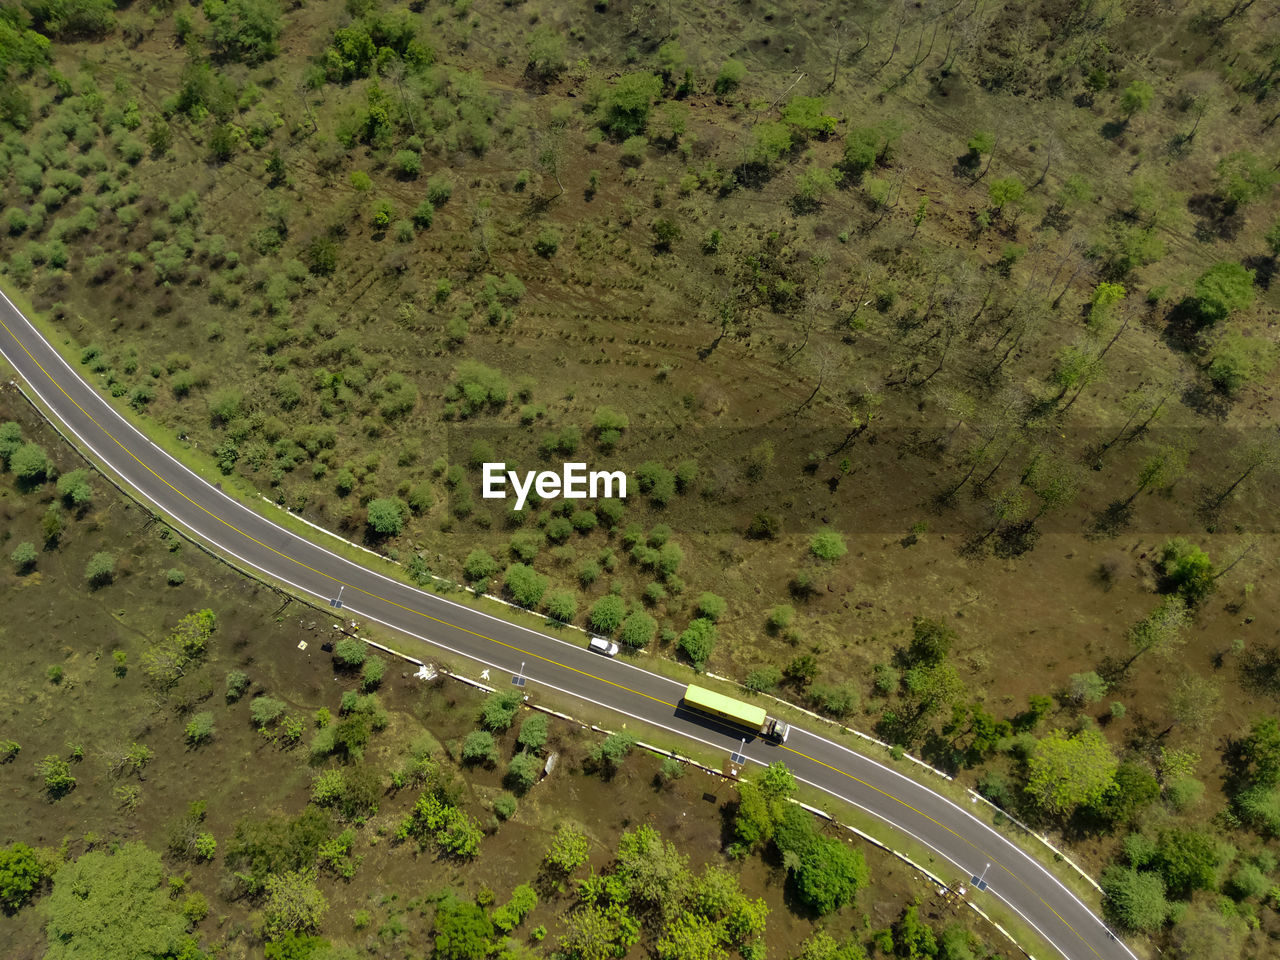 Aerial shot of road between the forests in national park situbondo, east java